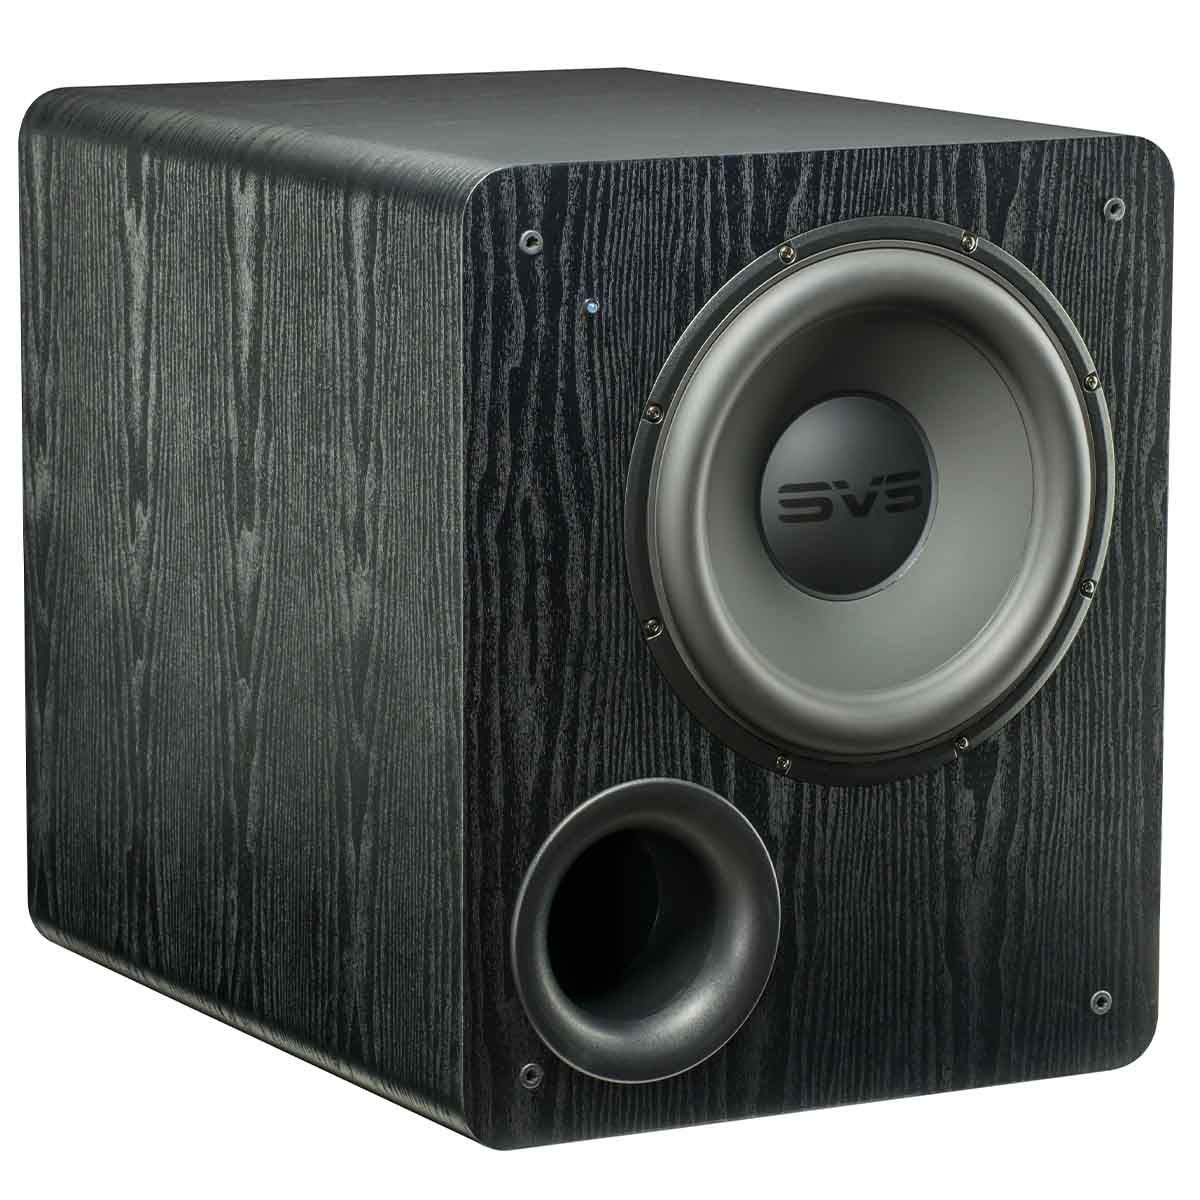 SVS PB-2000 12" Ported Subwoofer - Premium Black Ash - angled top view without grille